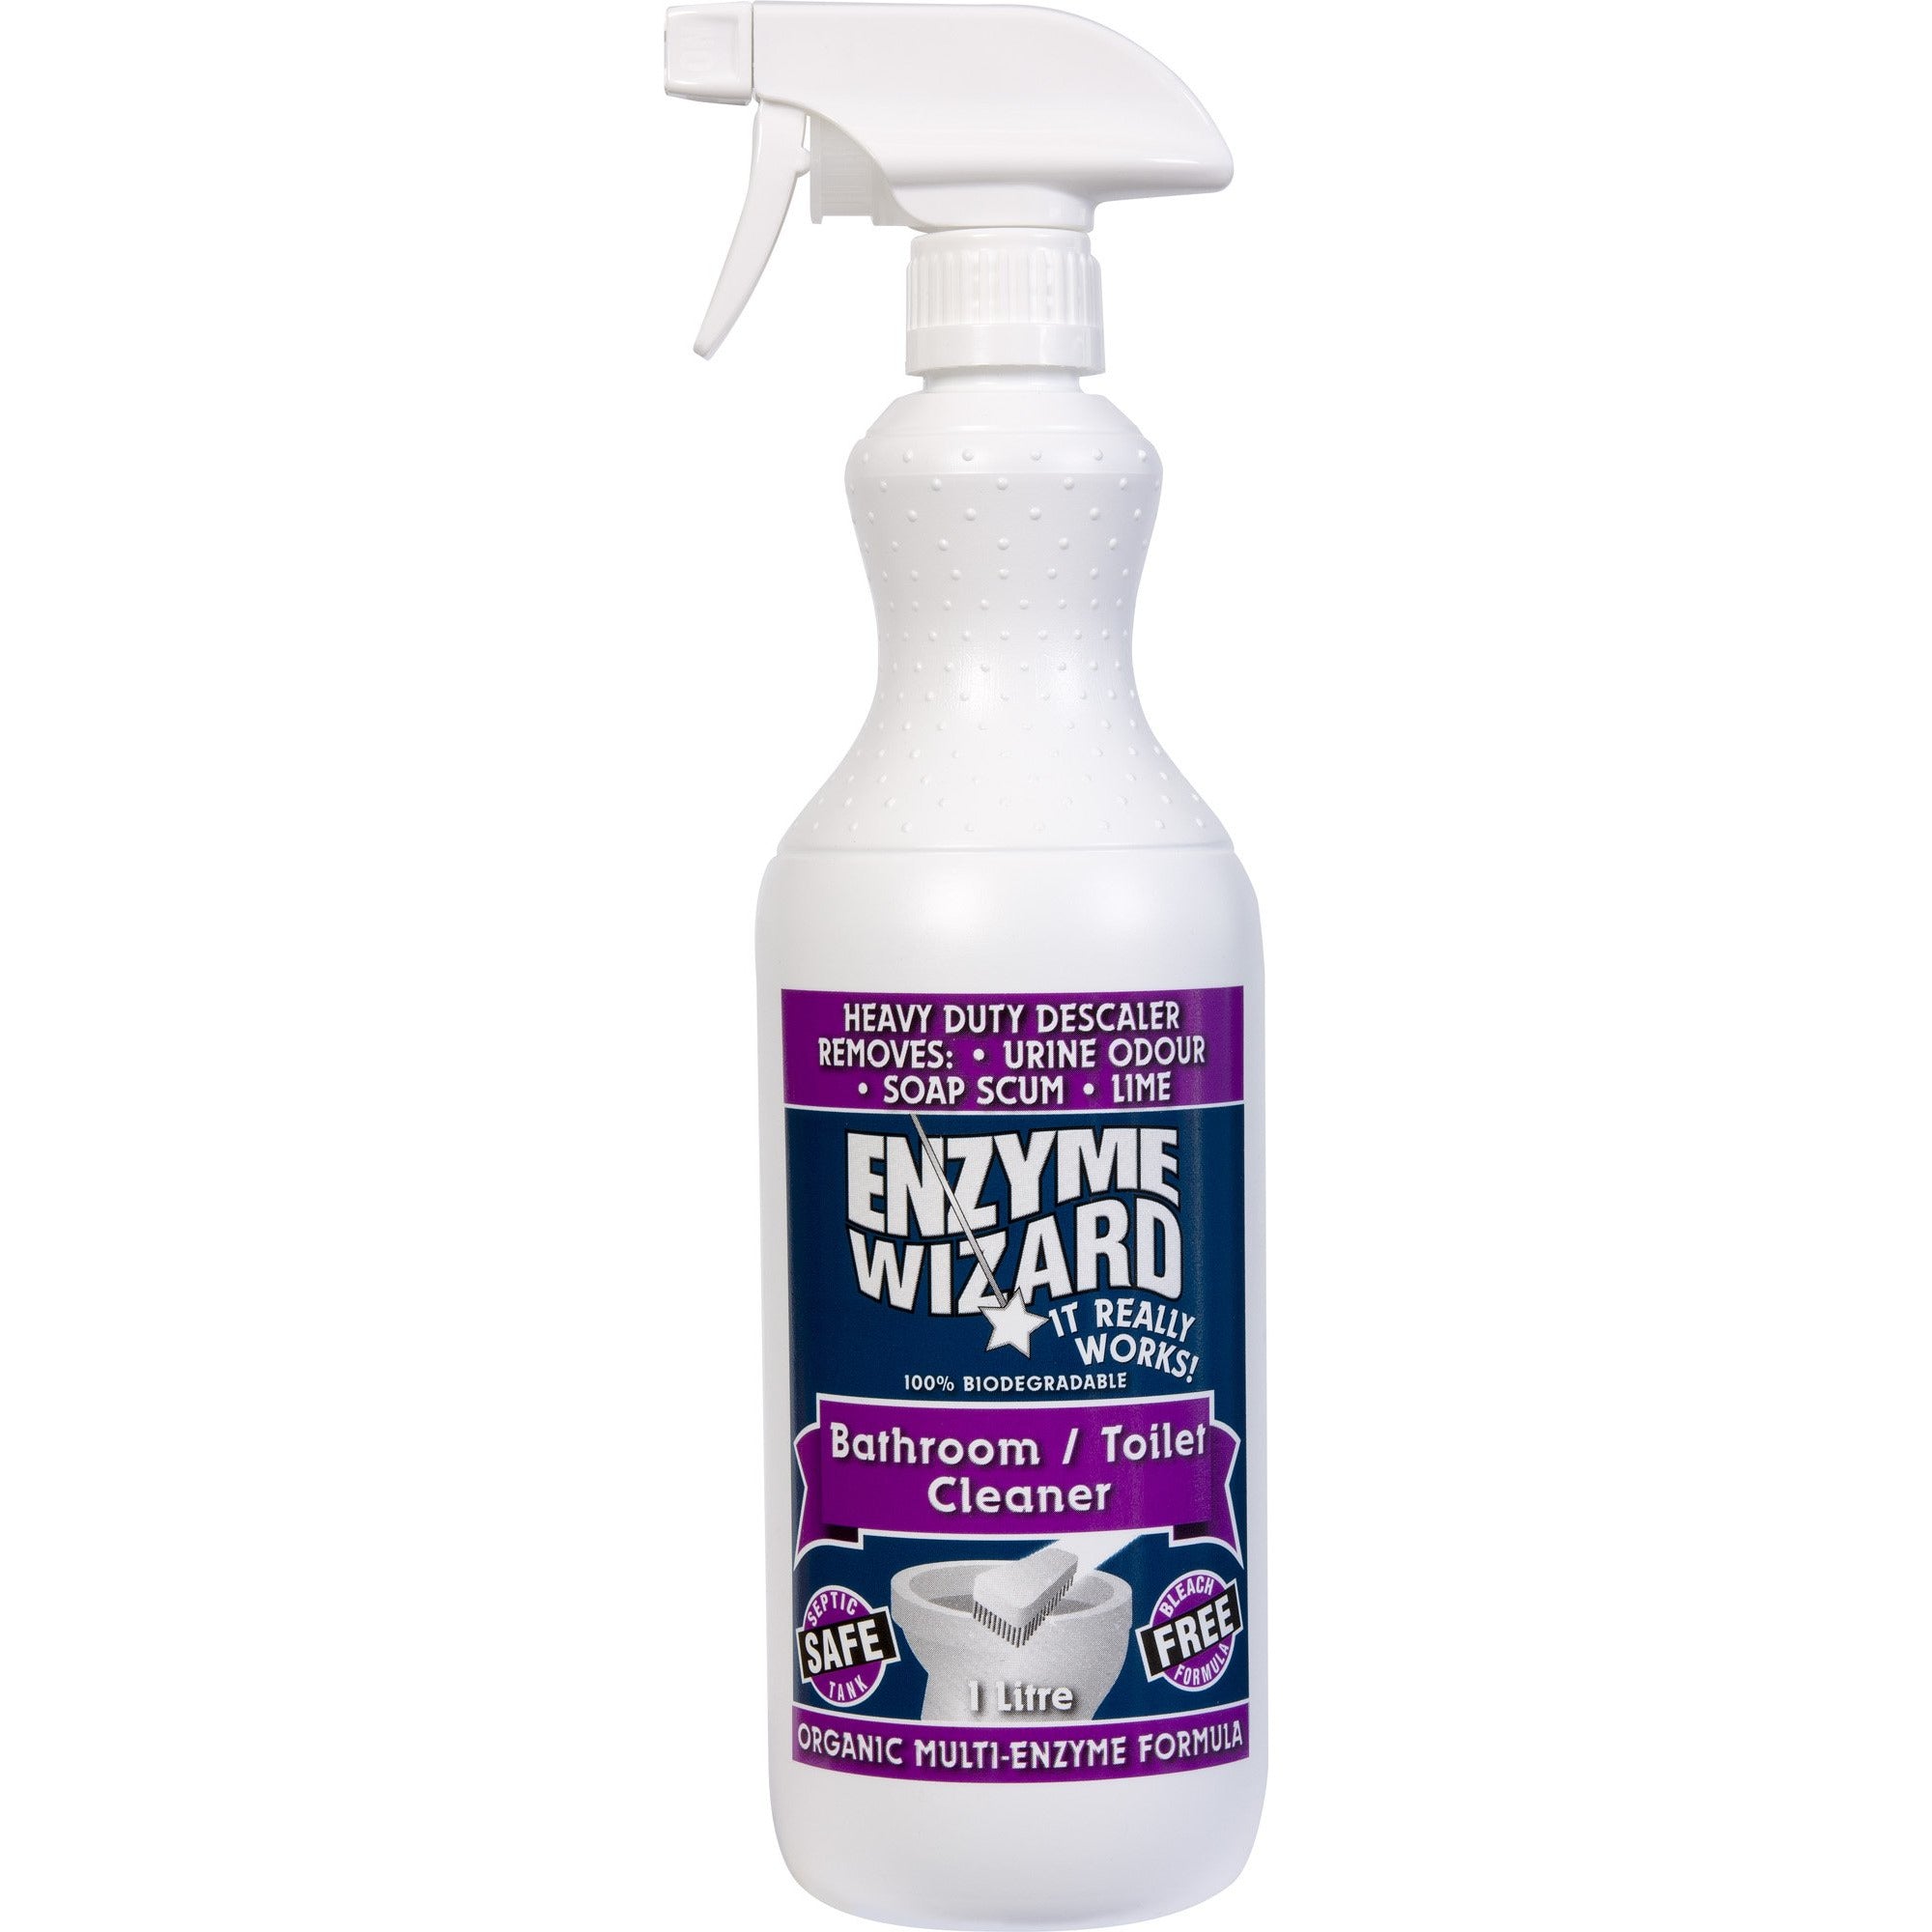 ENZYME WIZARD BATHROOM & TOILET CLEANER 1 LITRE